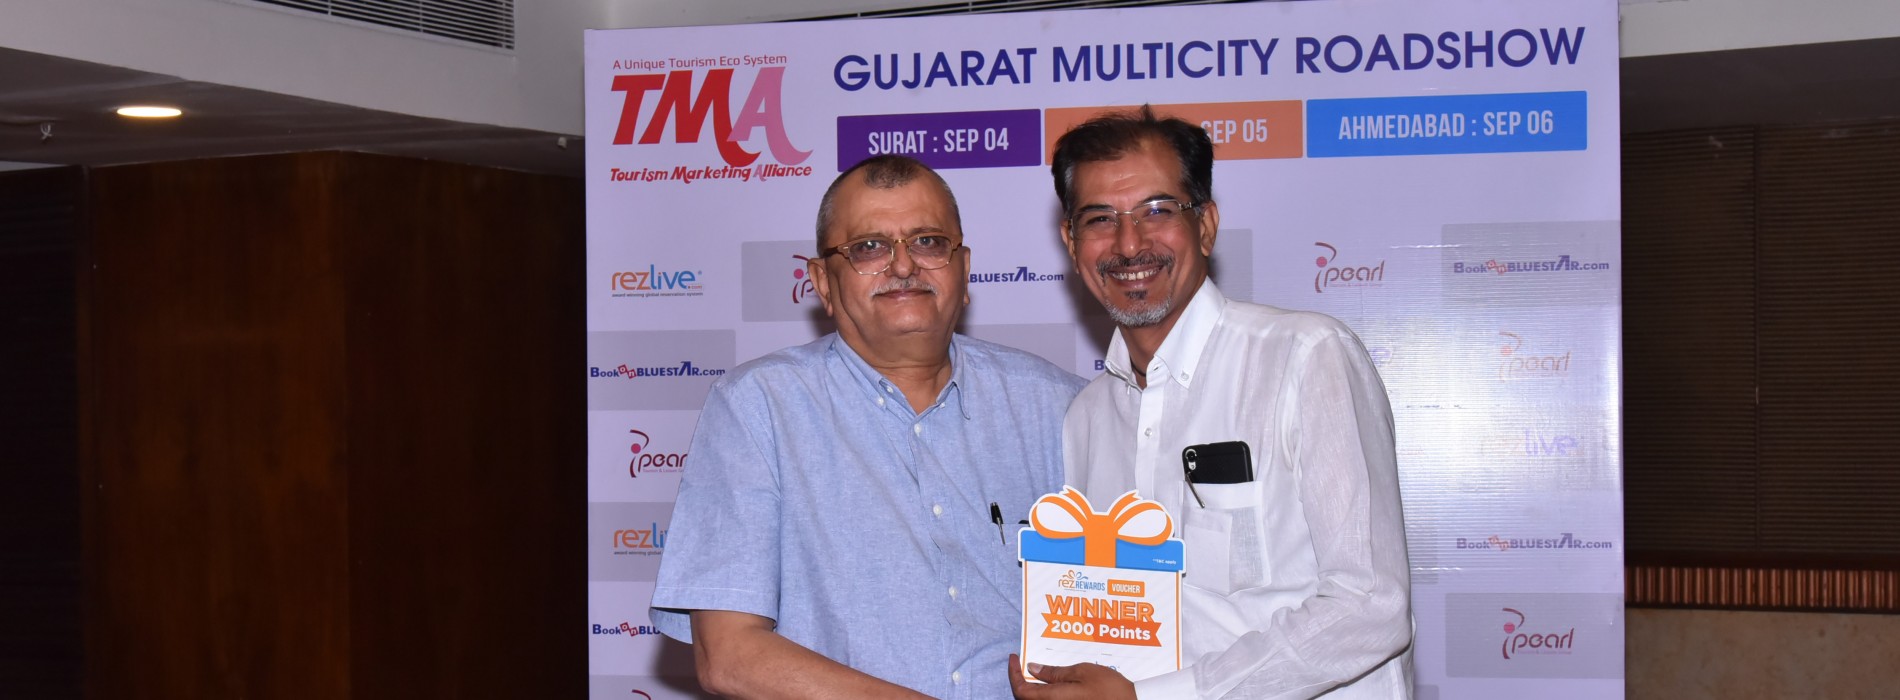 TMA successfully conducted multicity roadshow in Gujarat